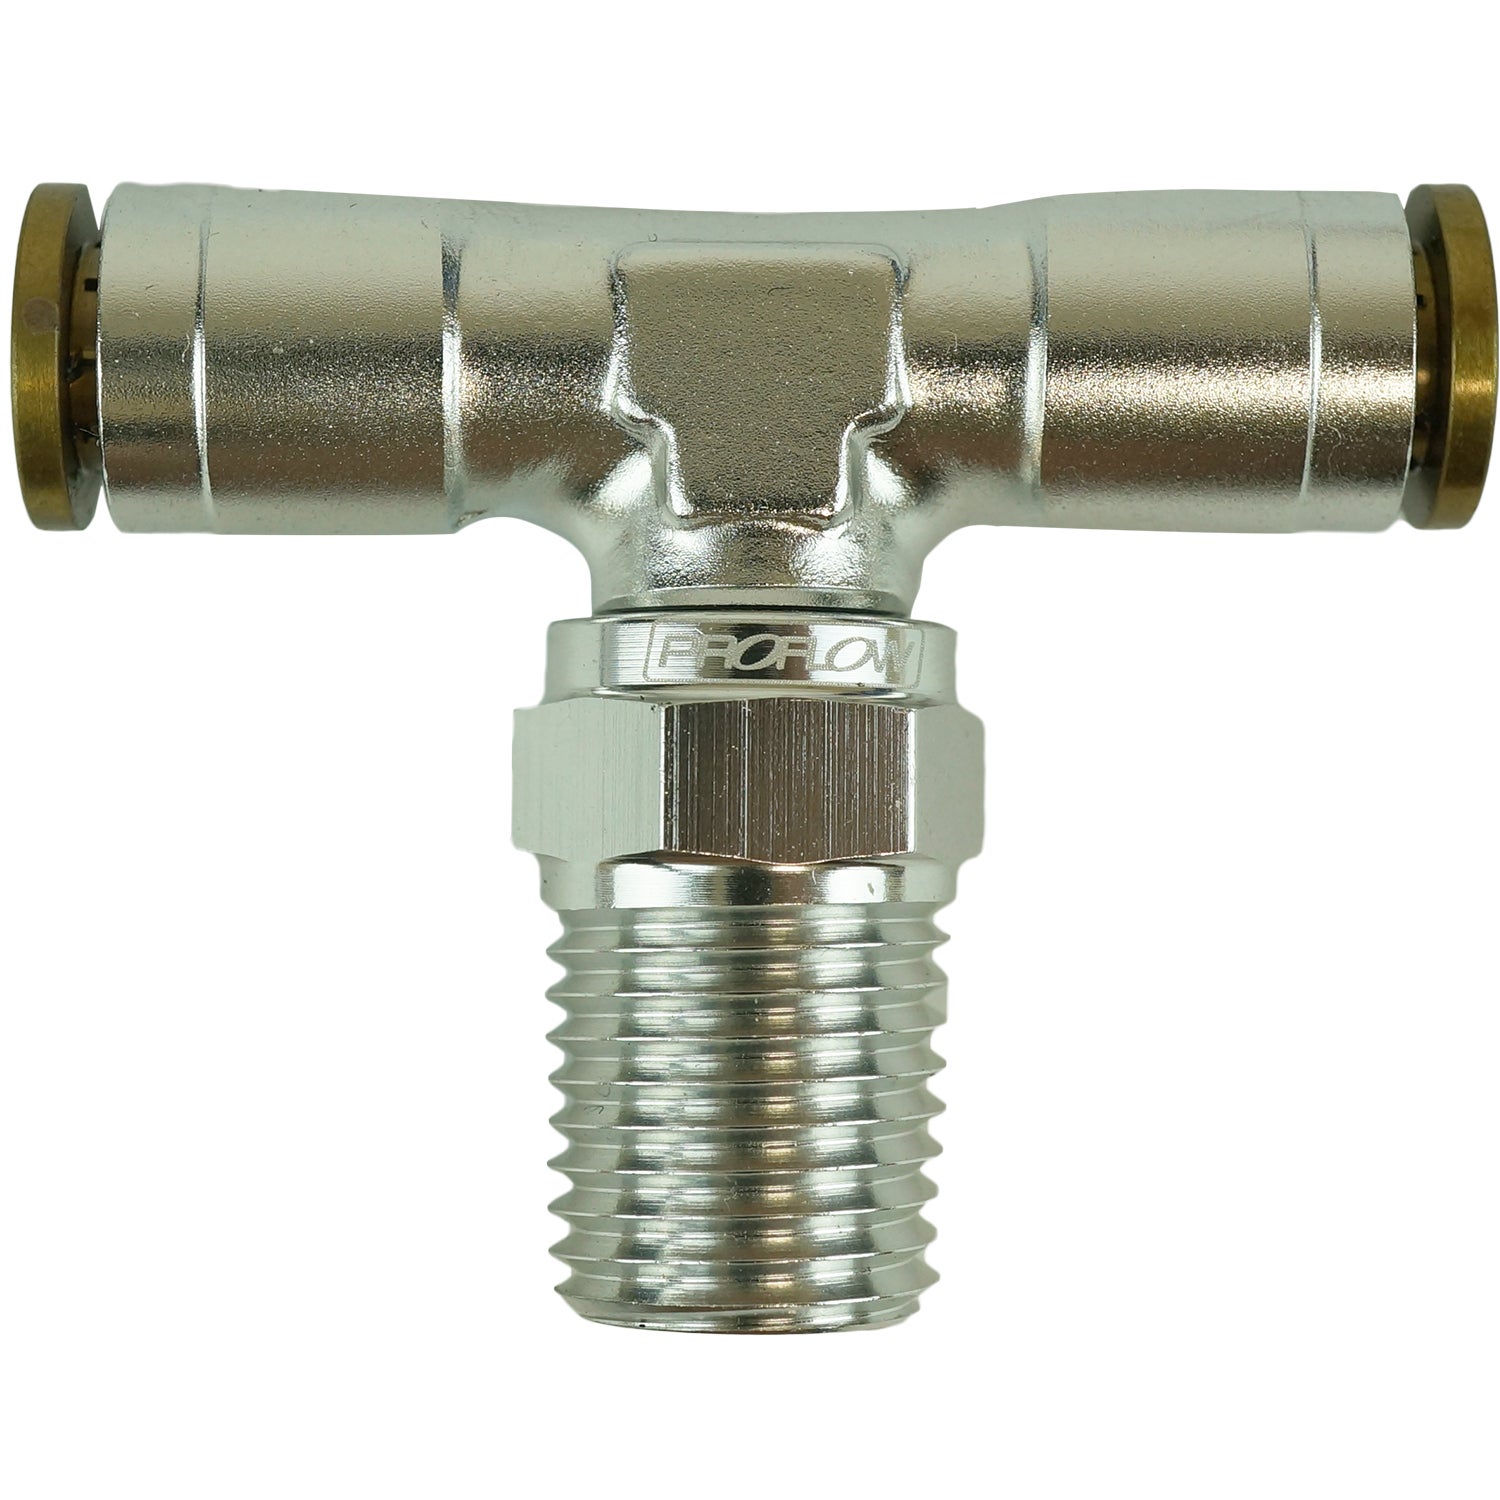 Proflow Fitting Push Release Tee 1/4in. Tube To 1/4in. NPT Silver PFE854-04S